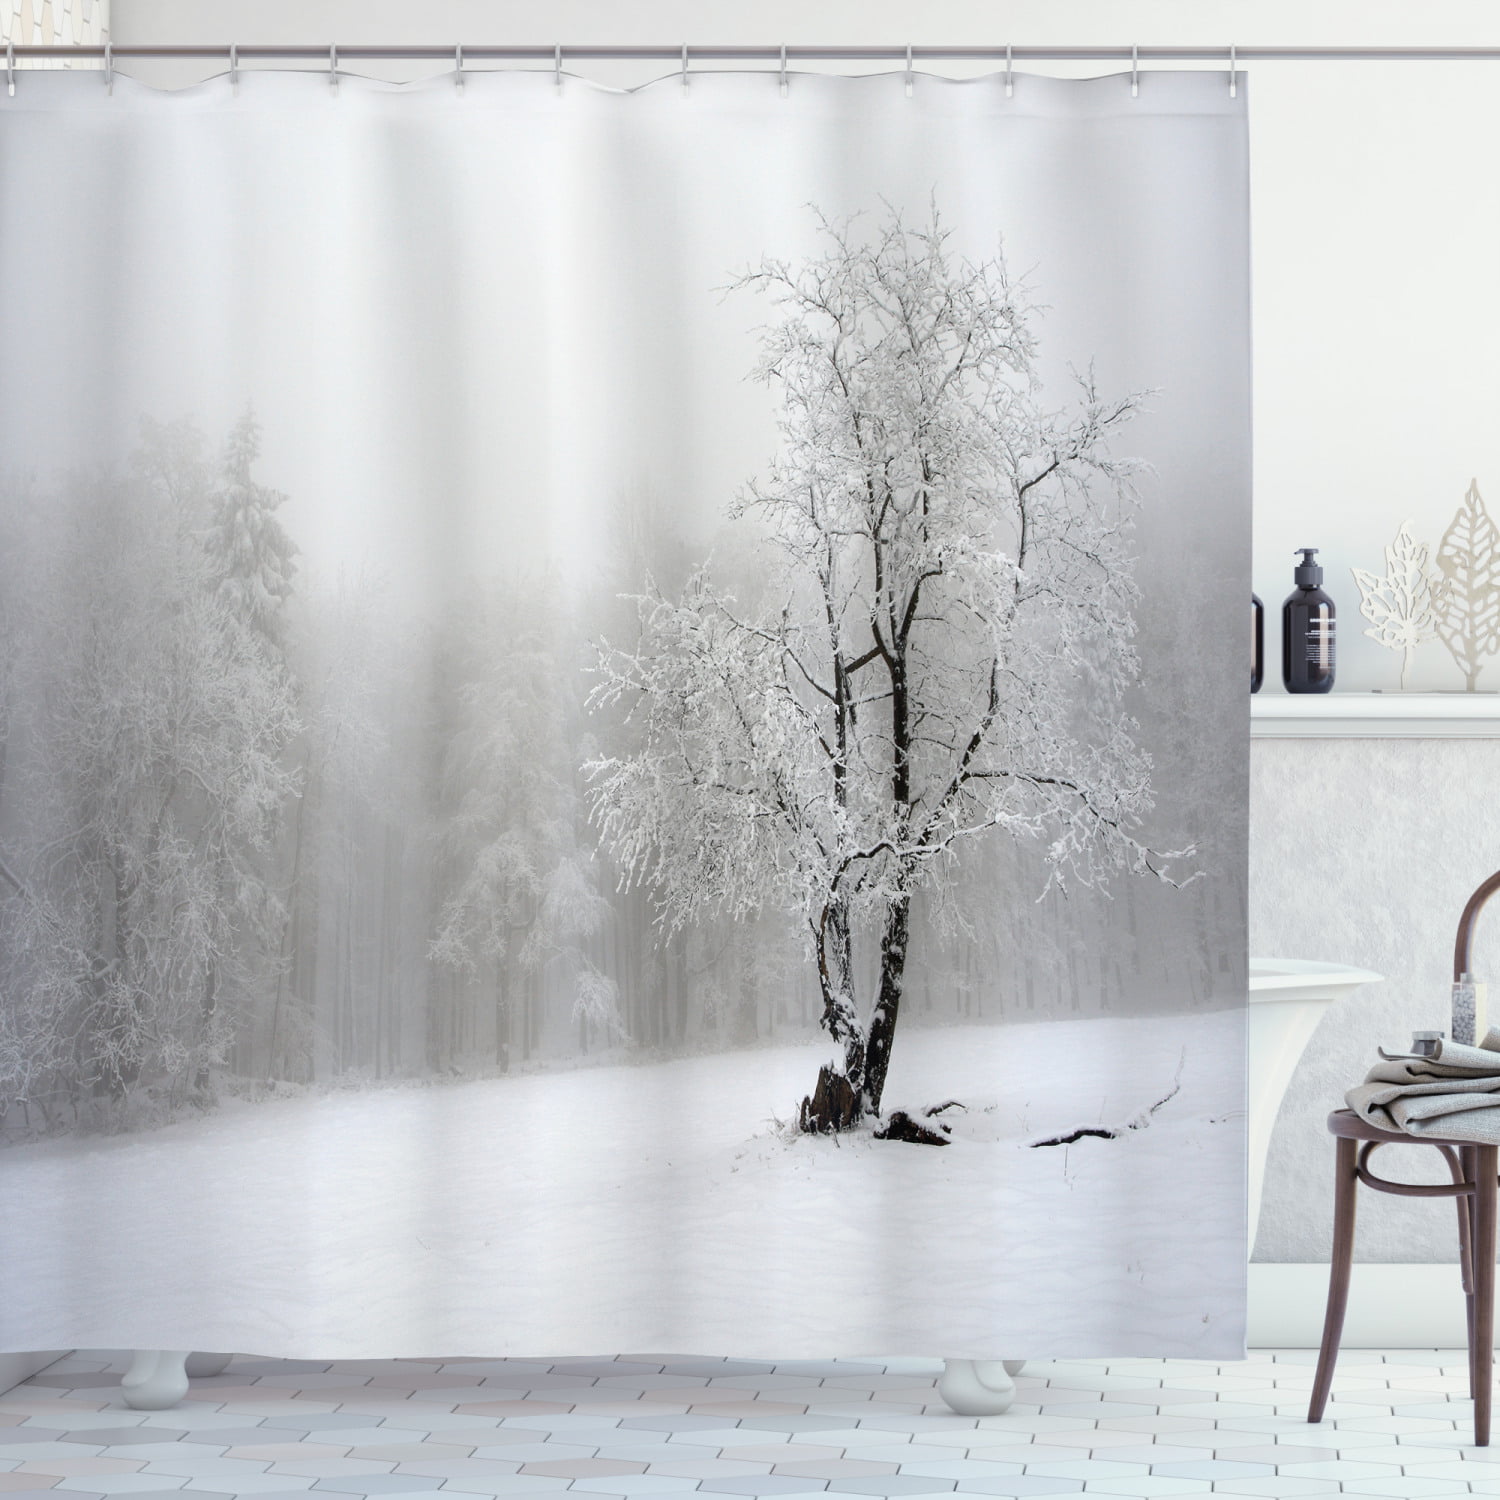 Blue White Winter Snow Park Bench Birds Christmas Holiday Home Shower Curtain 